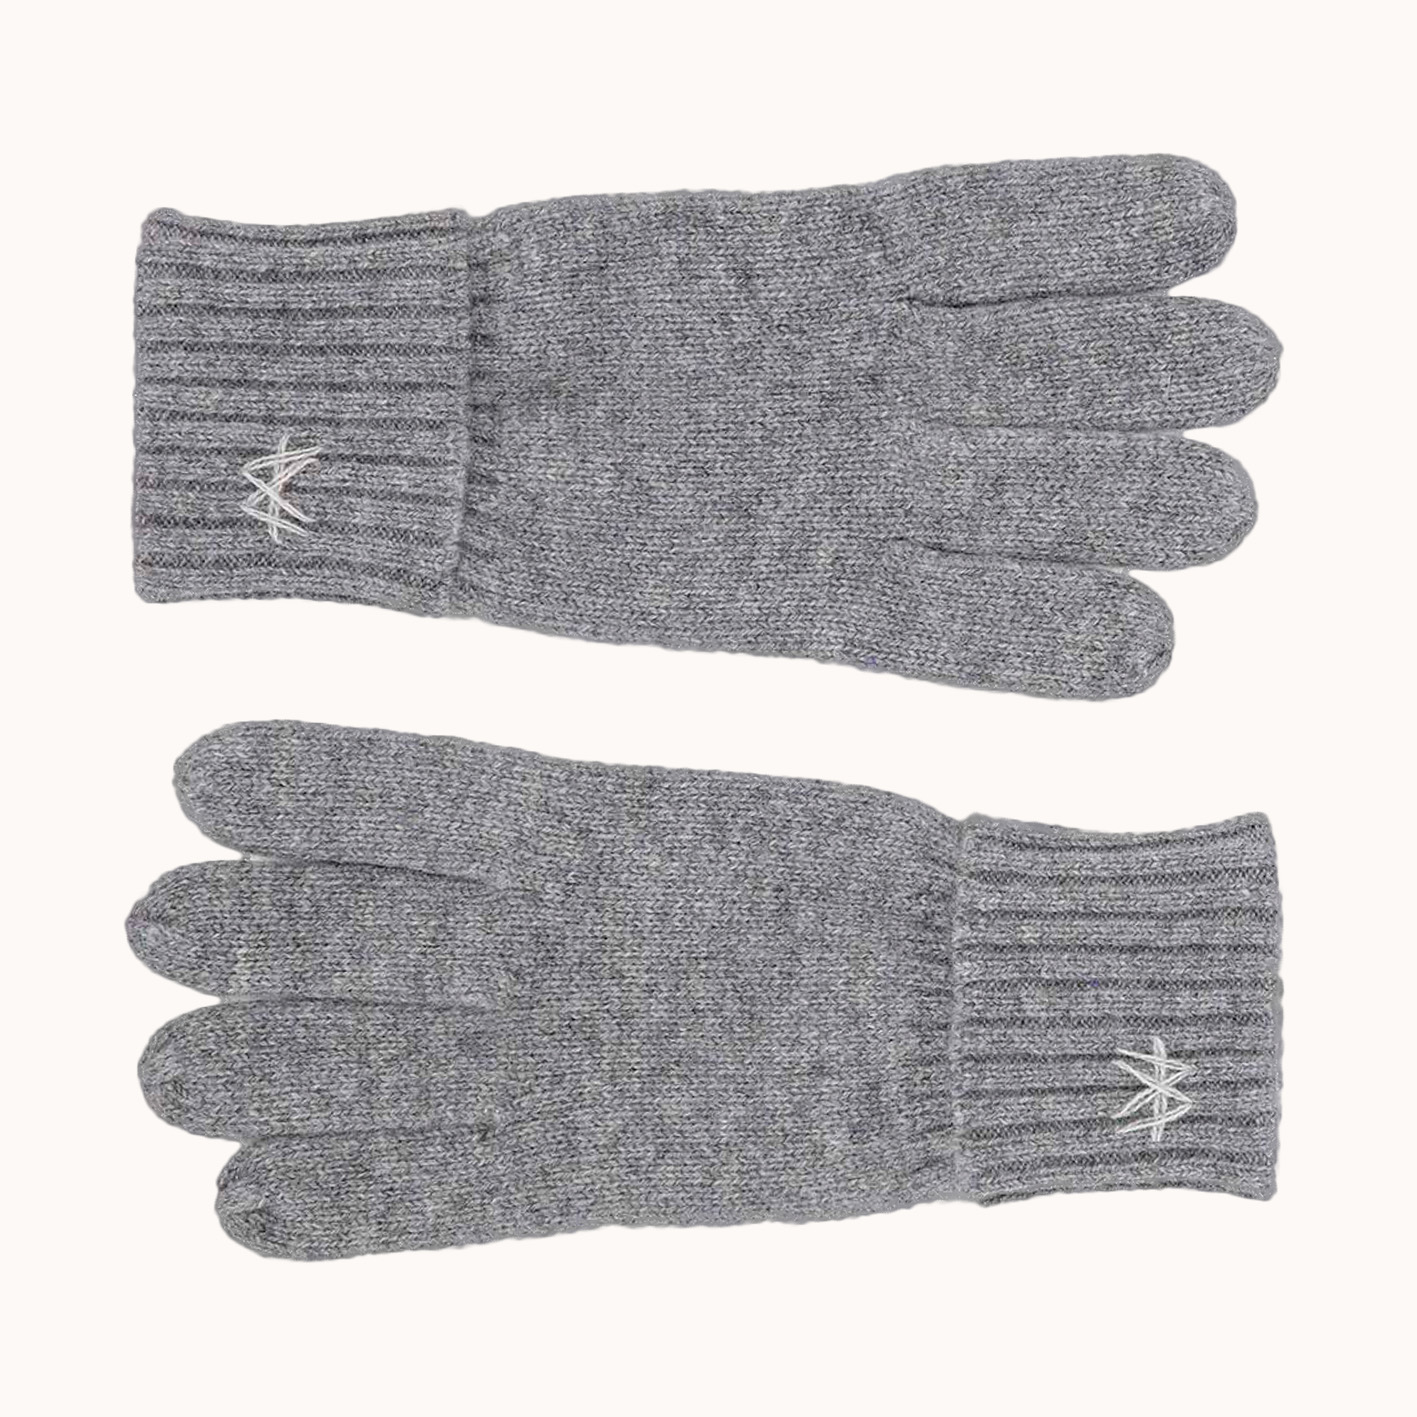 Knitted cashmere gloves from Wuth Copenhagen.